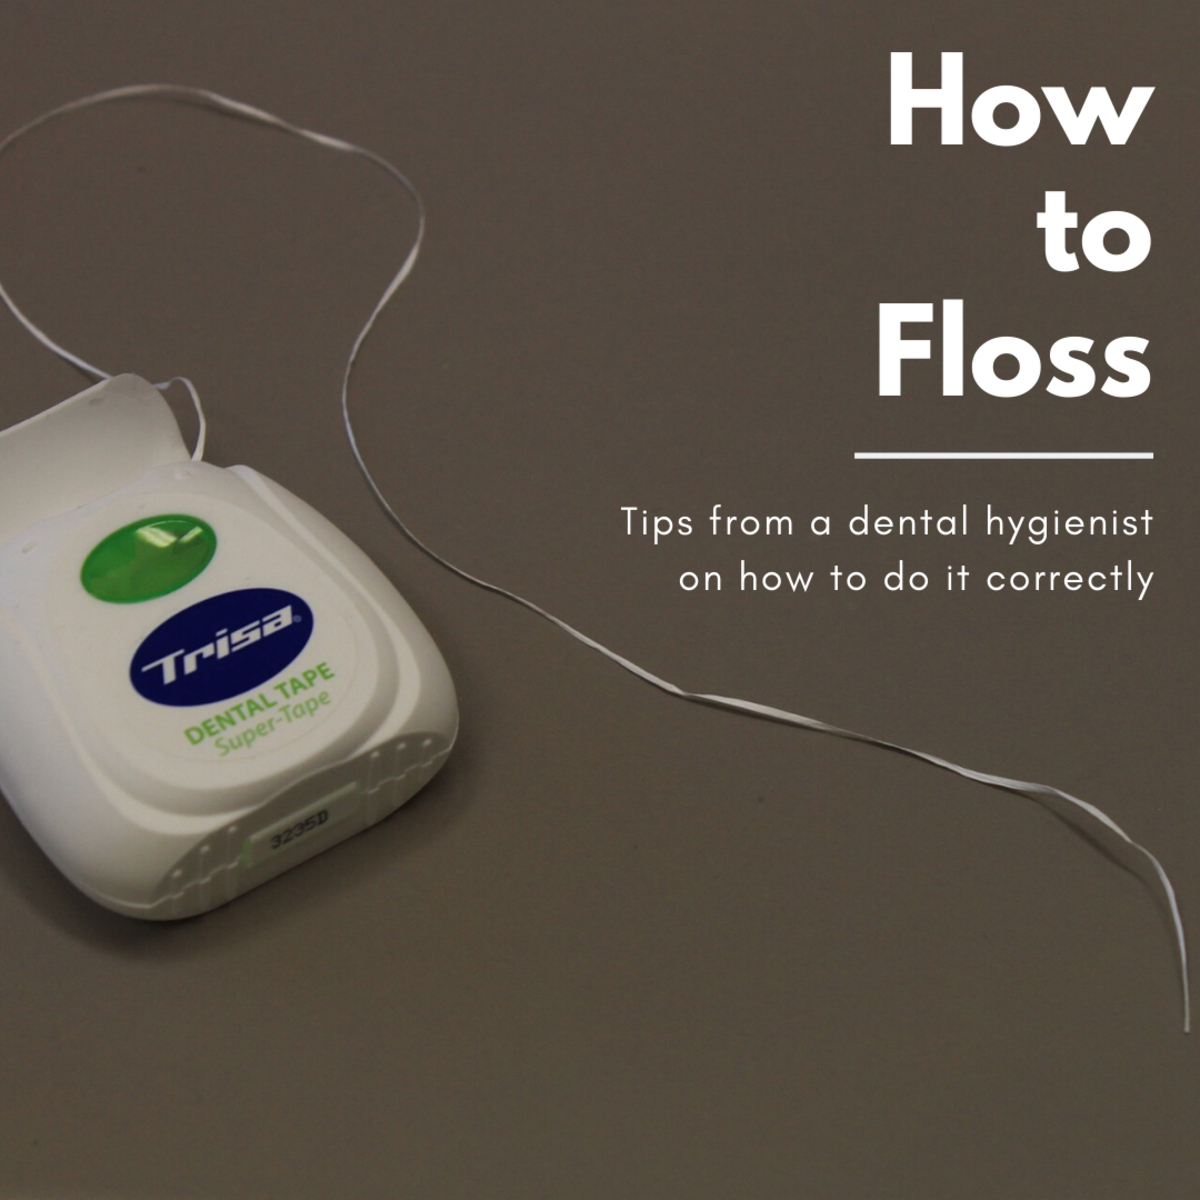 This article will provide in-depth tips on how to floss correctly, provided by a dental hygienist. 